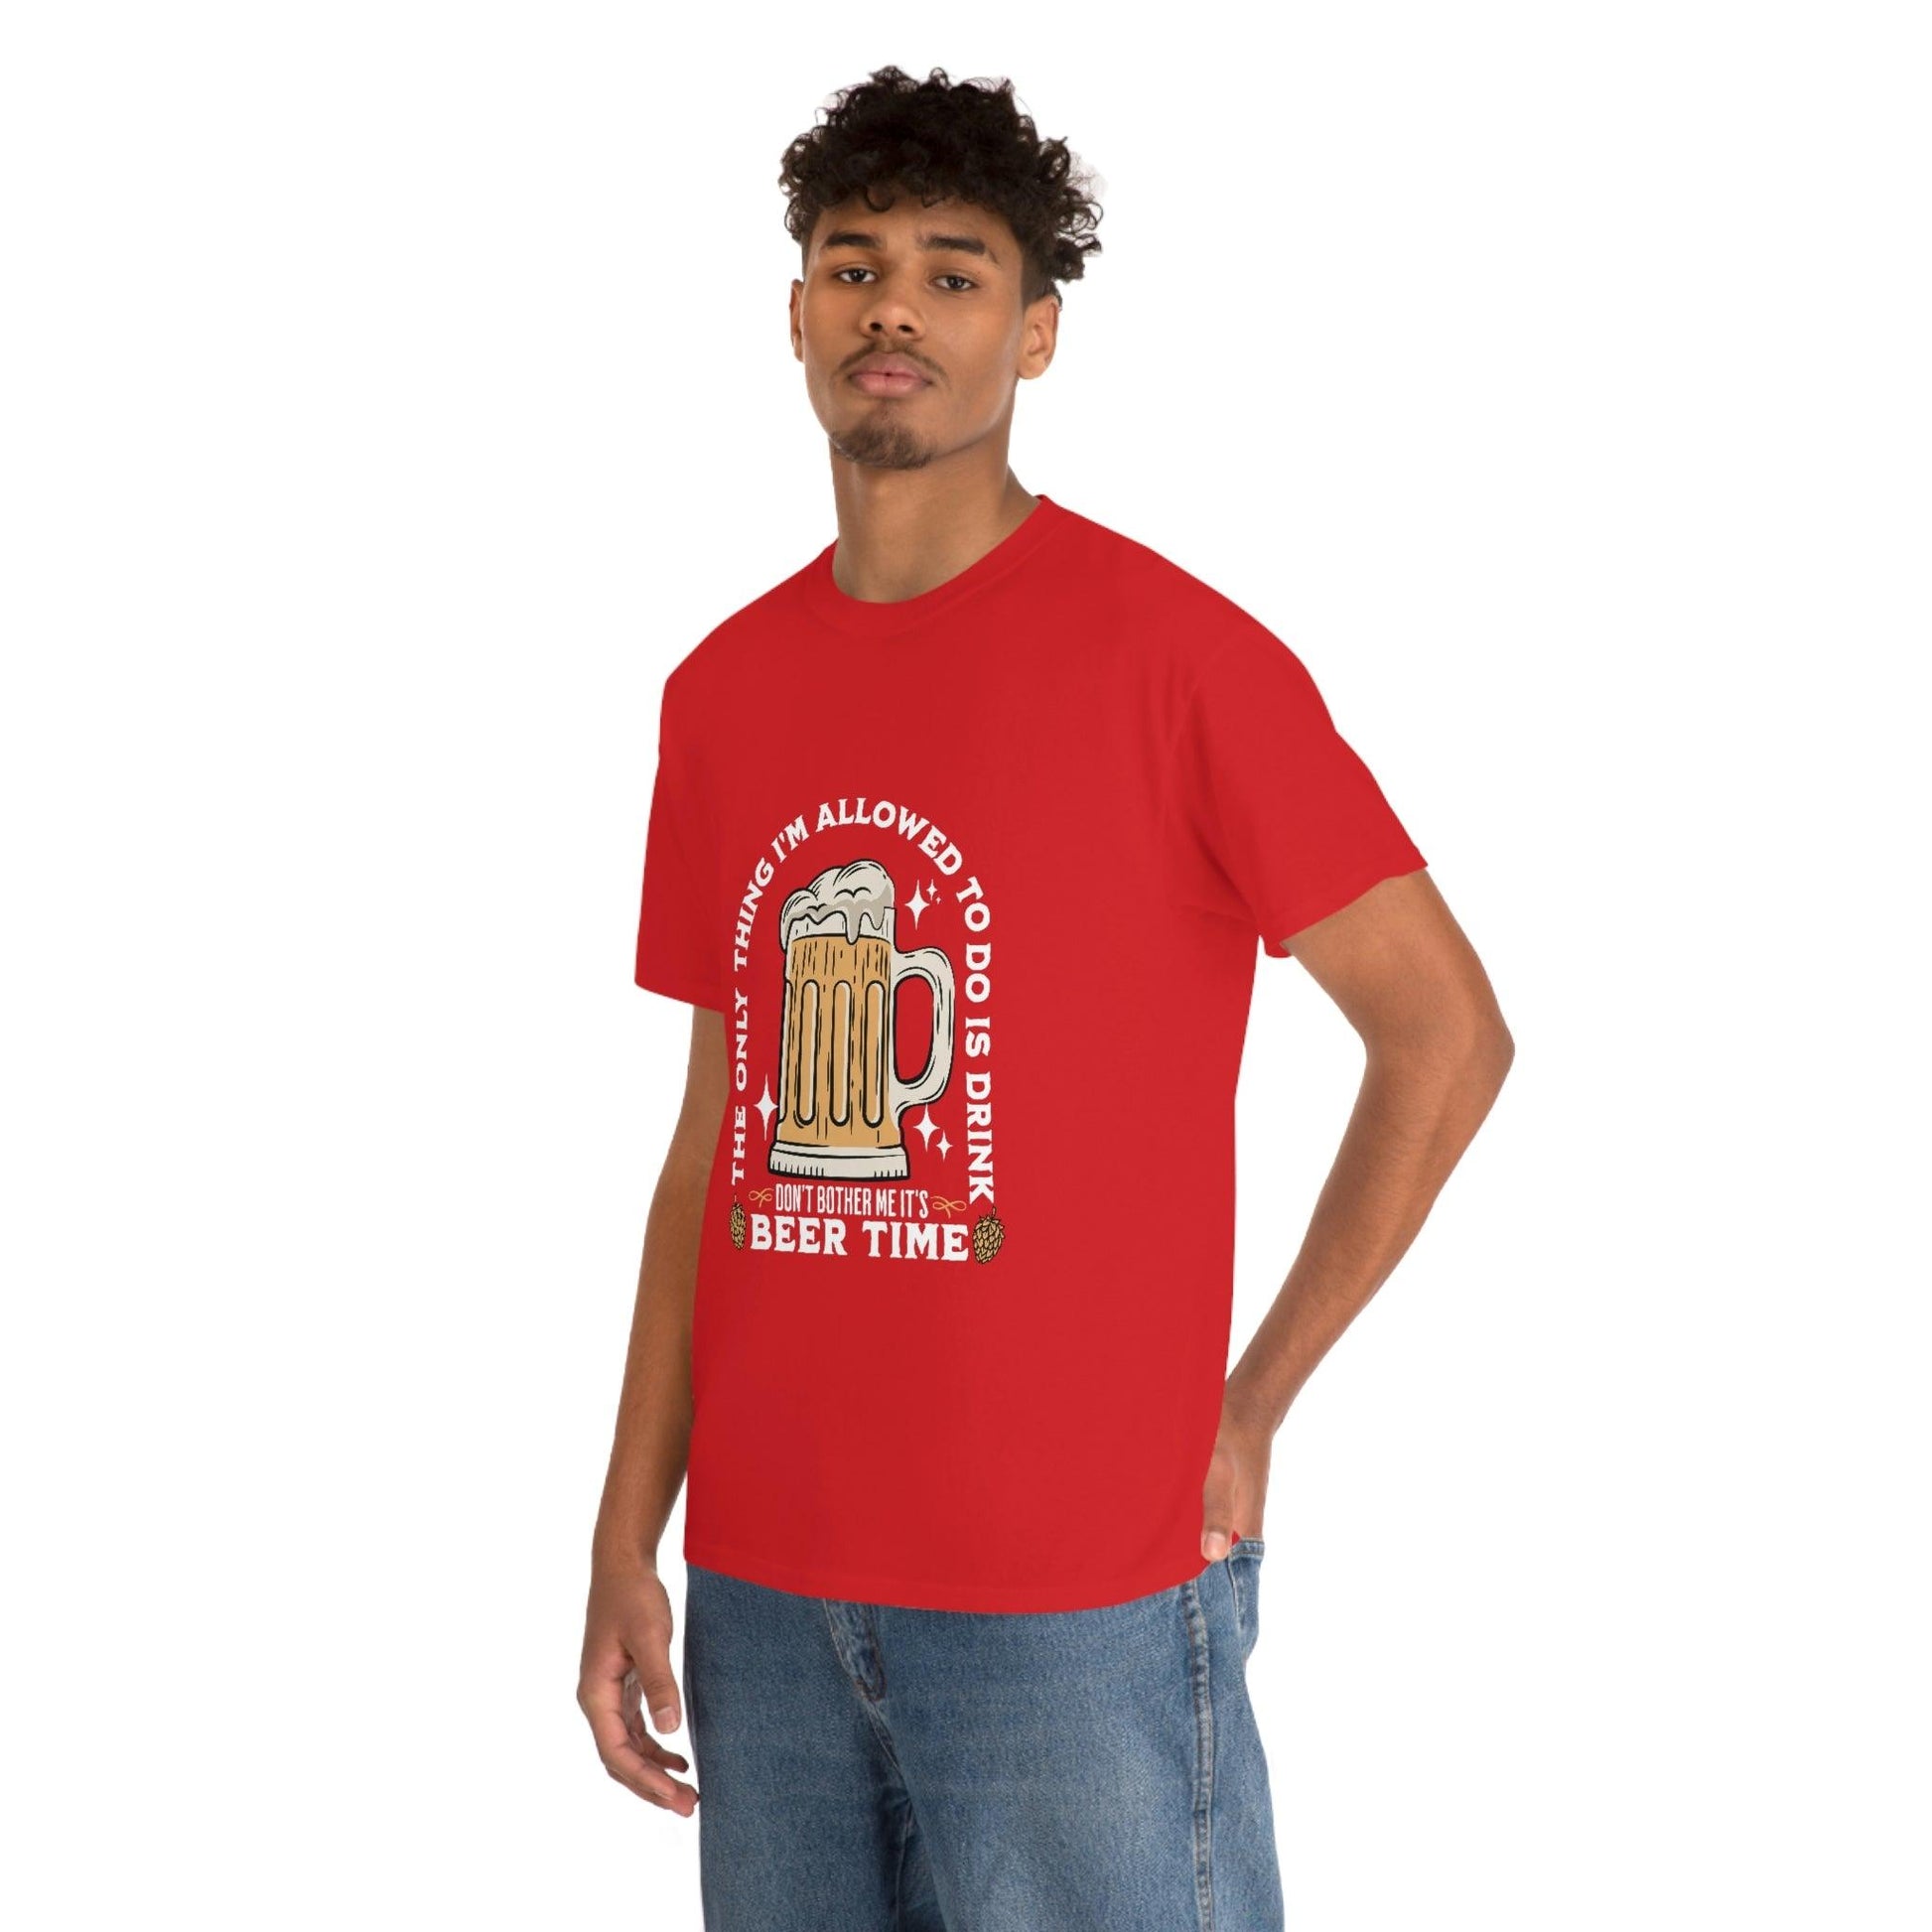 The only thing I am allowed to do is Drink - Beer Time Cotton Tee - Giftsmojo